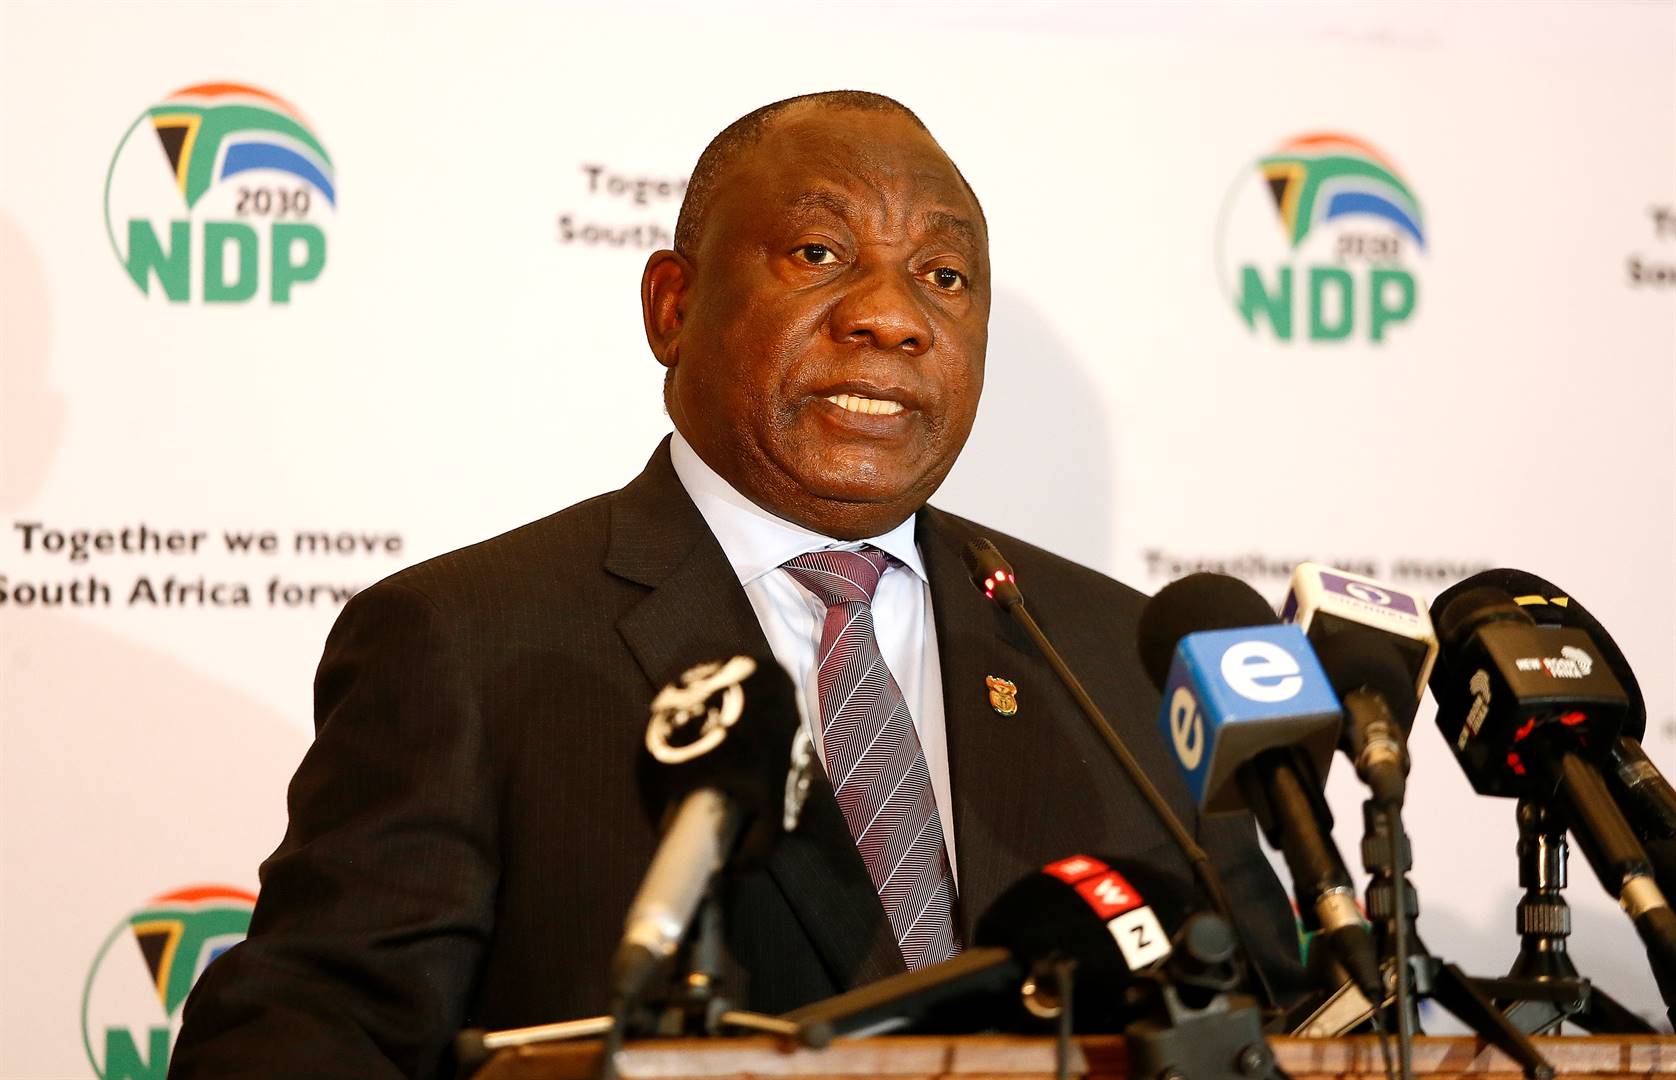 President Cyril Ramaphosa. (Photo: Getty Images)